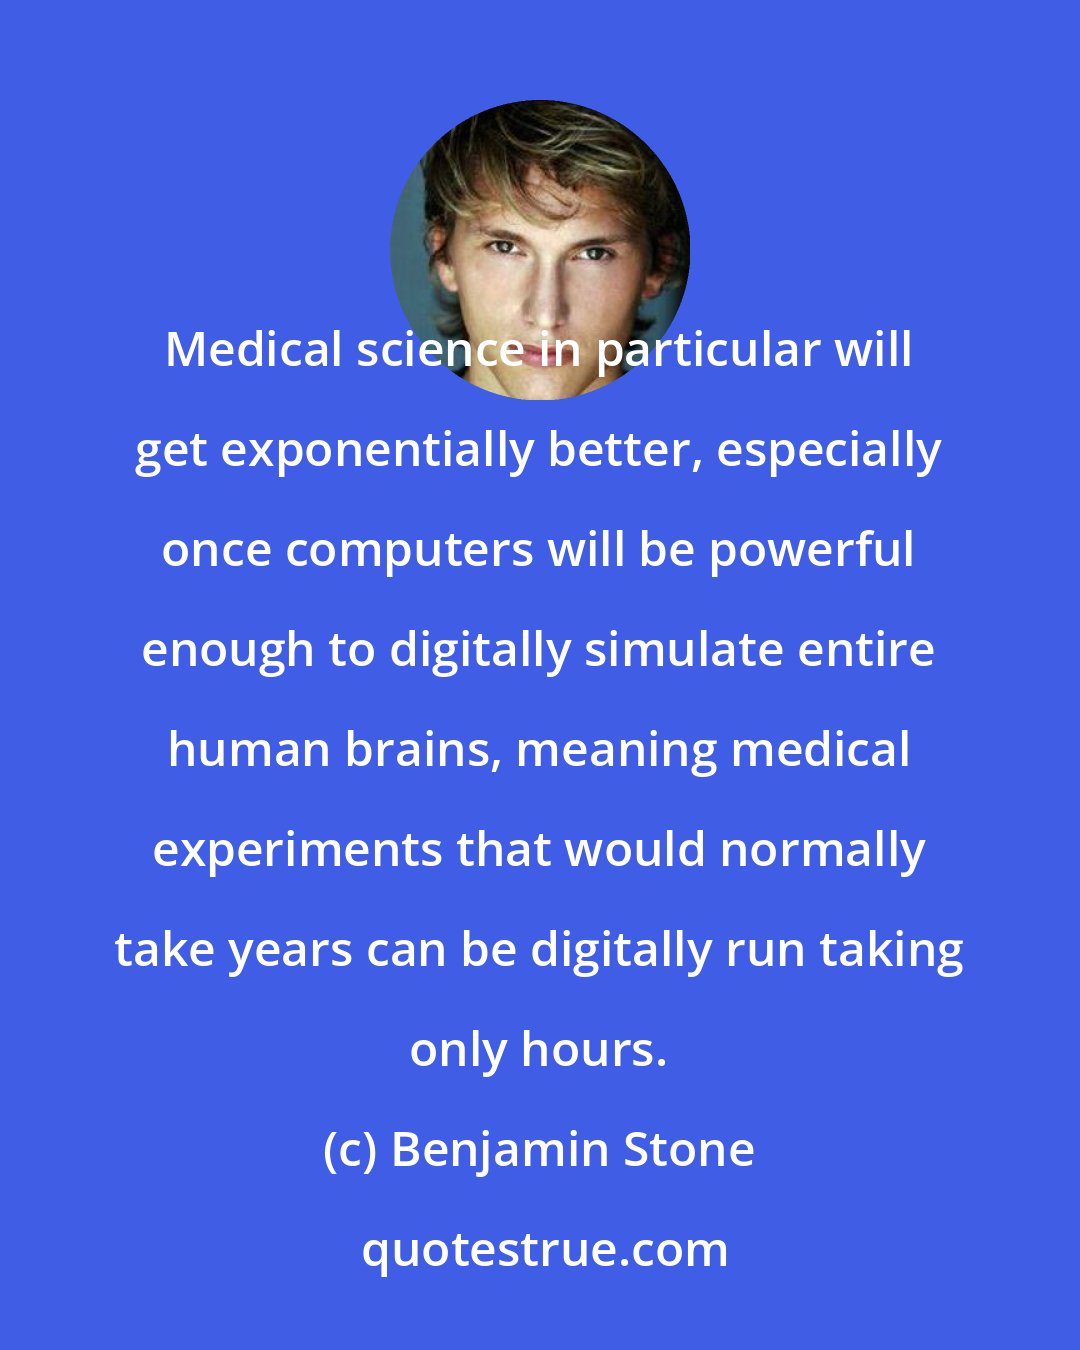 Benjamin Stone: Medical science in particular will get exponentially better, especially once computers will be powerful enough to digitally simulate entire human brains, meaning medical experiments that would normally take years can be digitally run taking only hours.